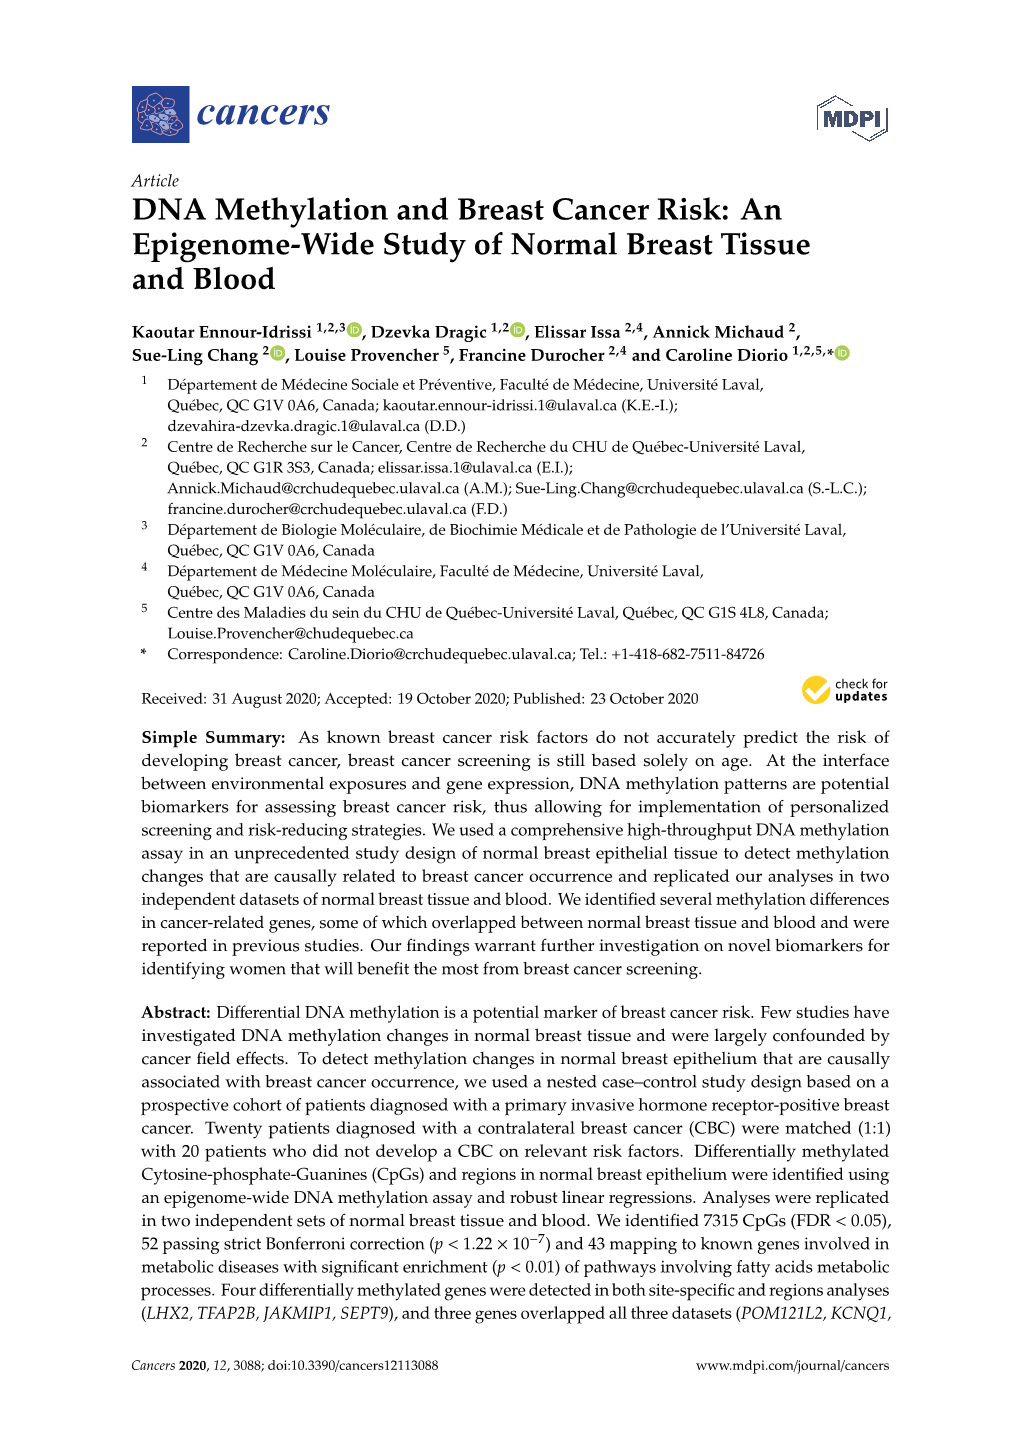 DNA Methylation and Breast Cancer Risk: an Epigenome-Wide Study of Normal Breast Tissue and Blood